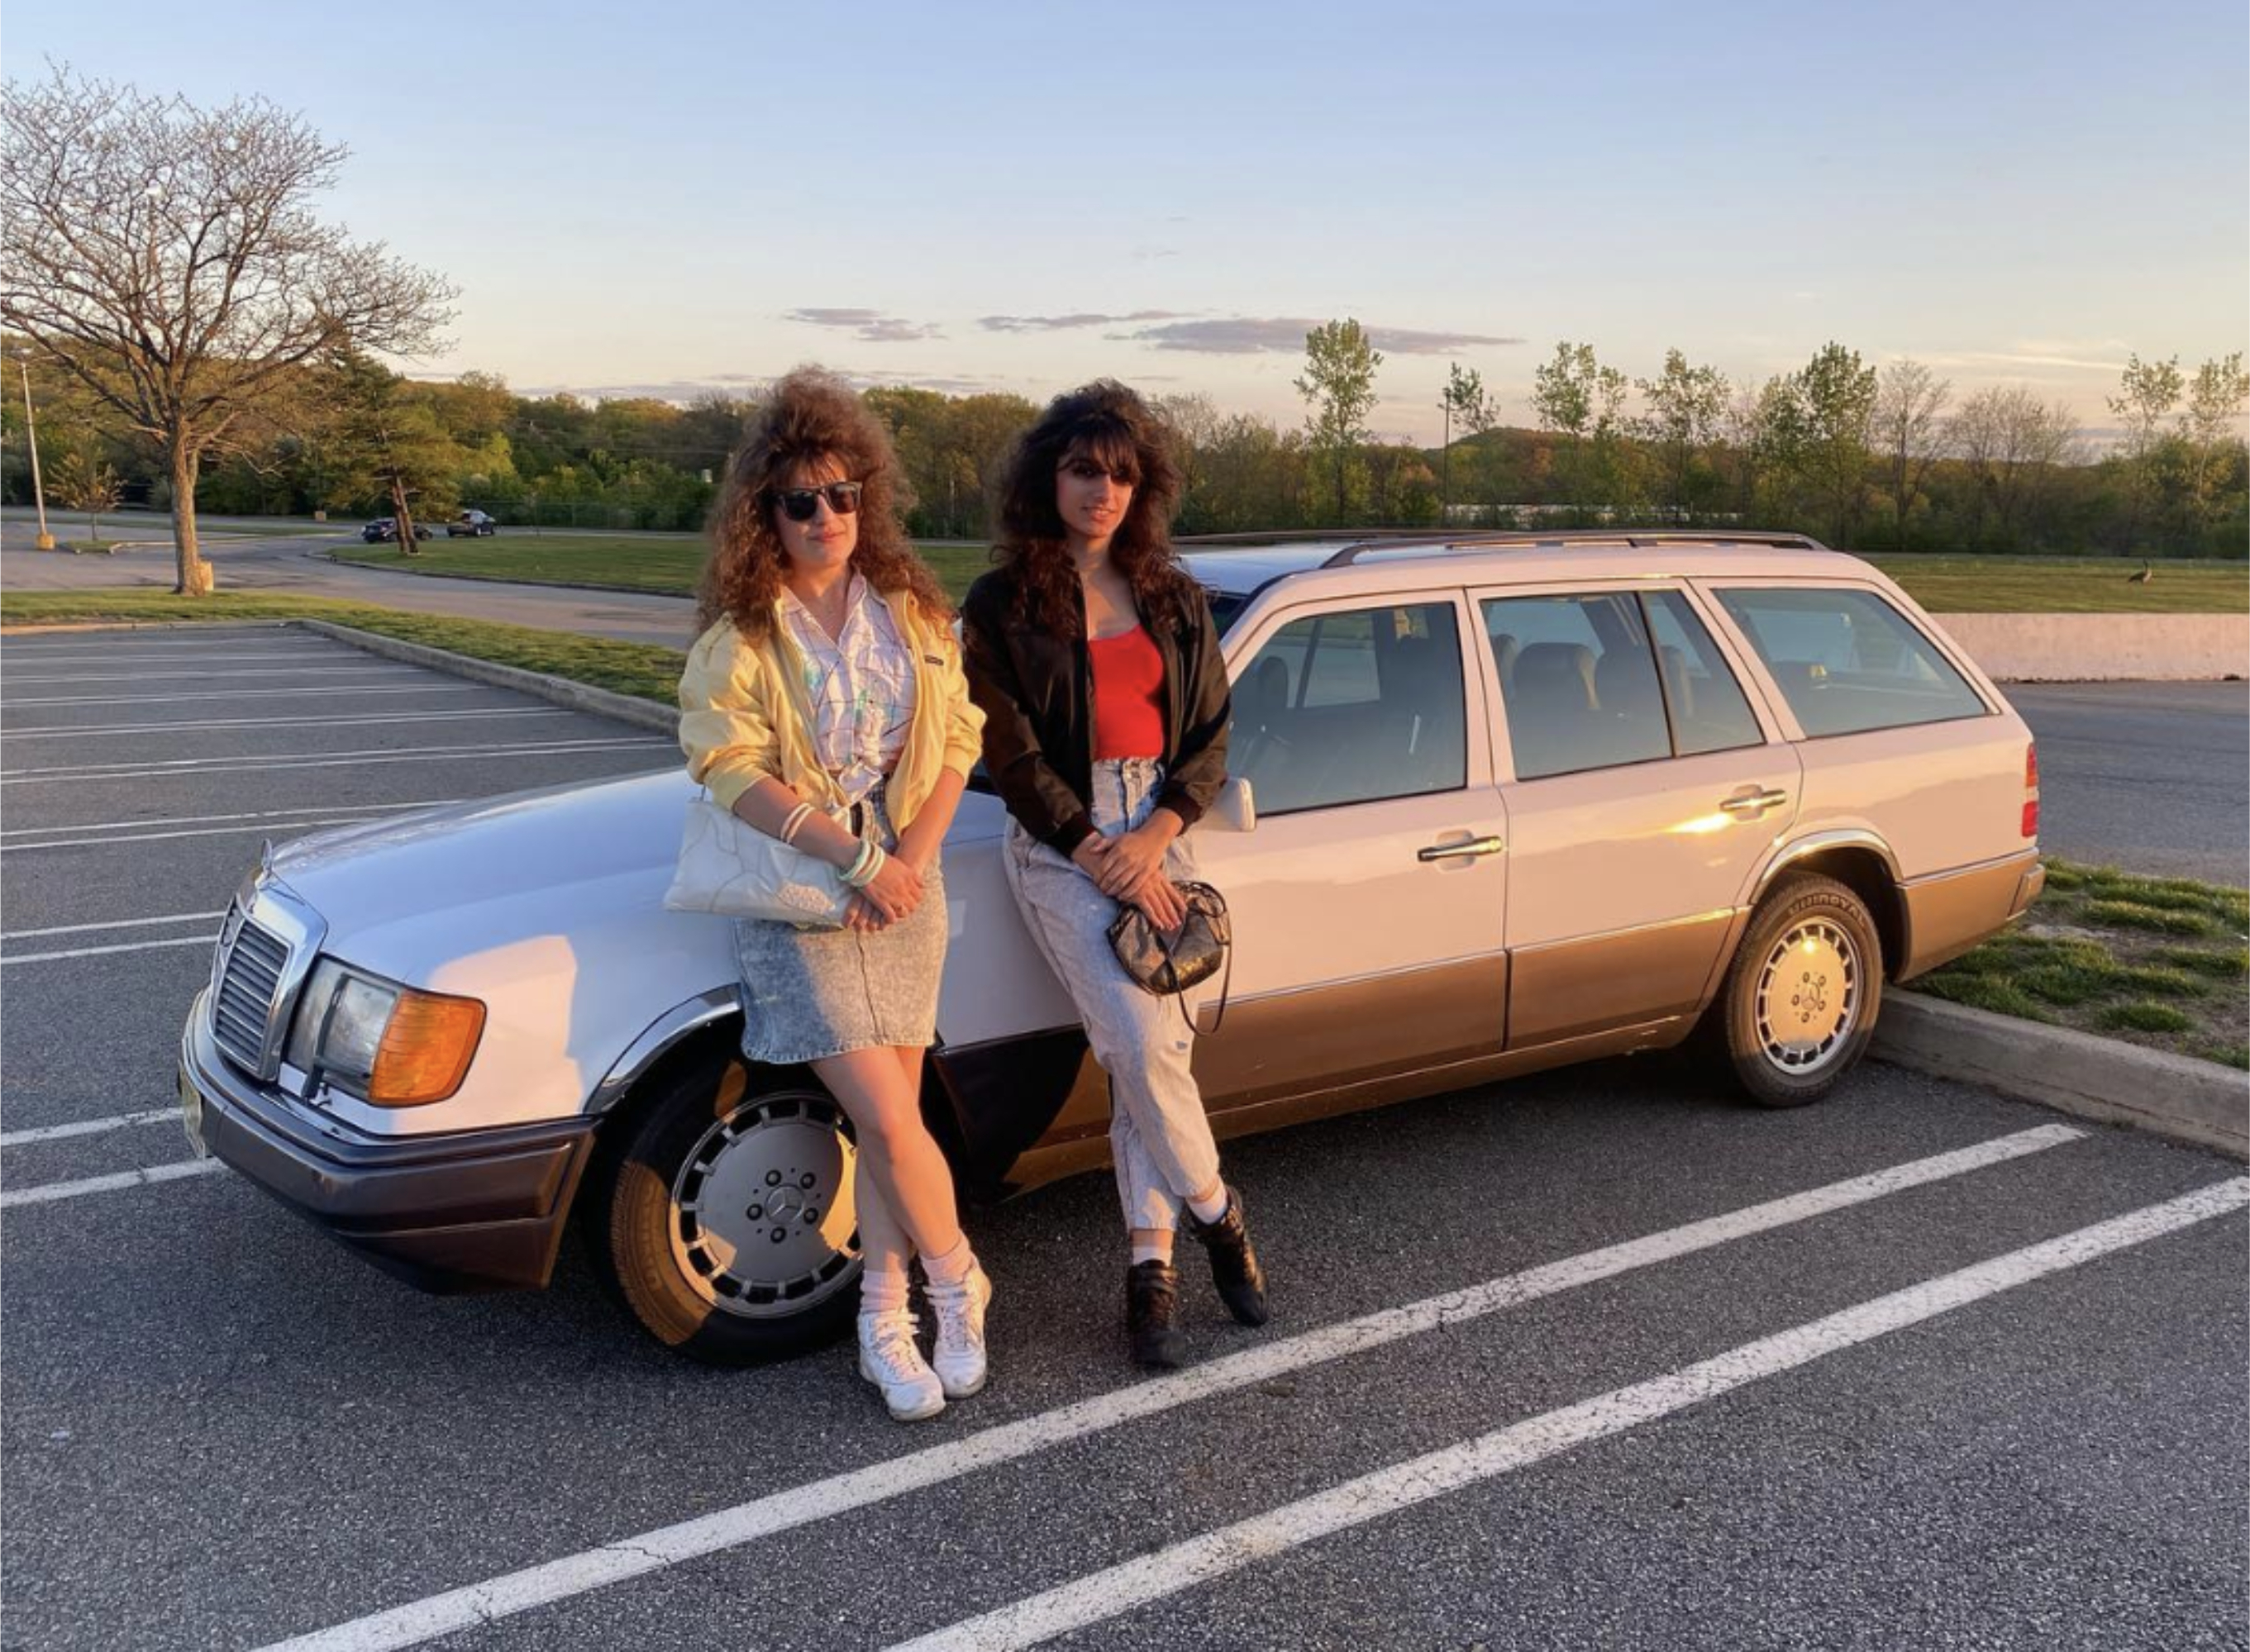 Two women with 1980s fashion, one in a yellow jacket and skirt, the other in a black jacket and jeans, pose in front of a vintage station wagon in a parking lot